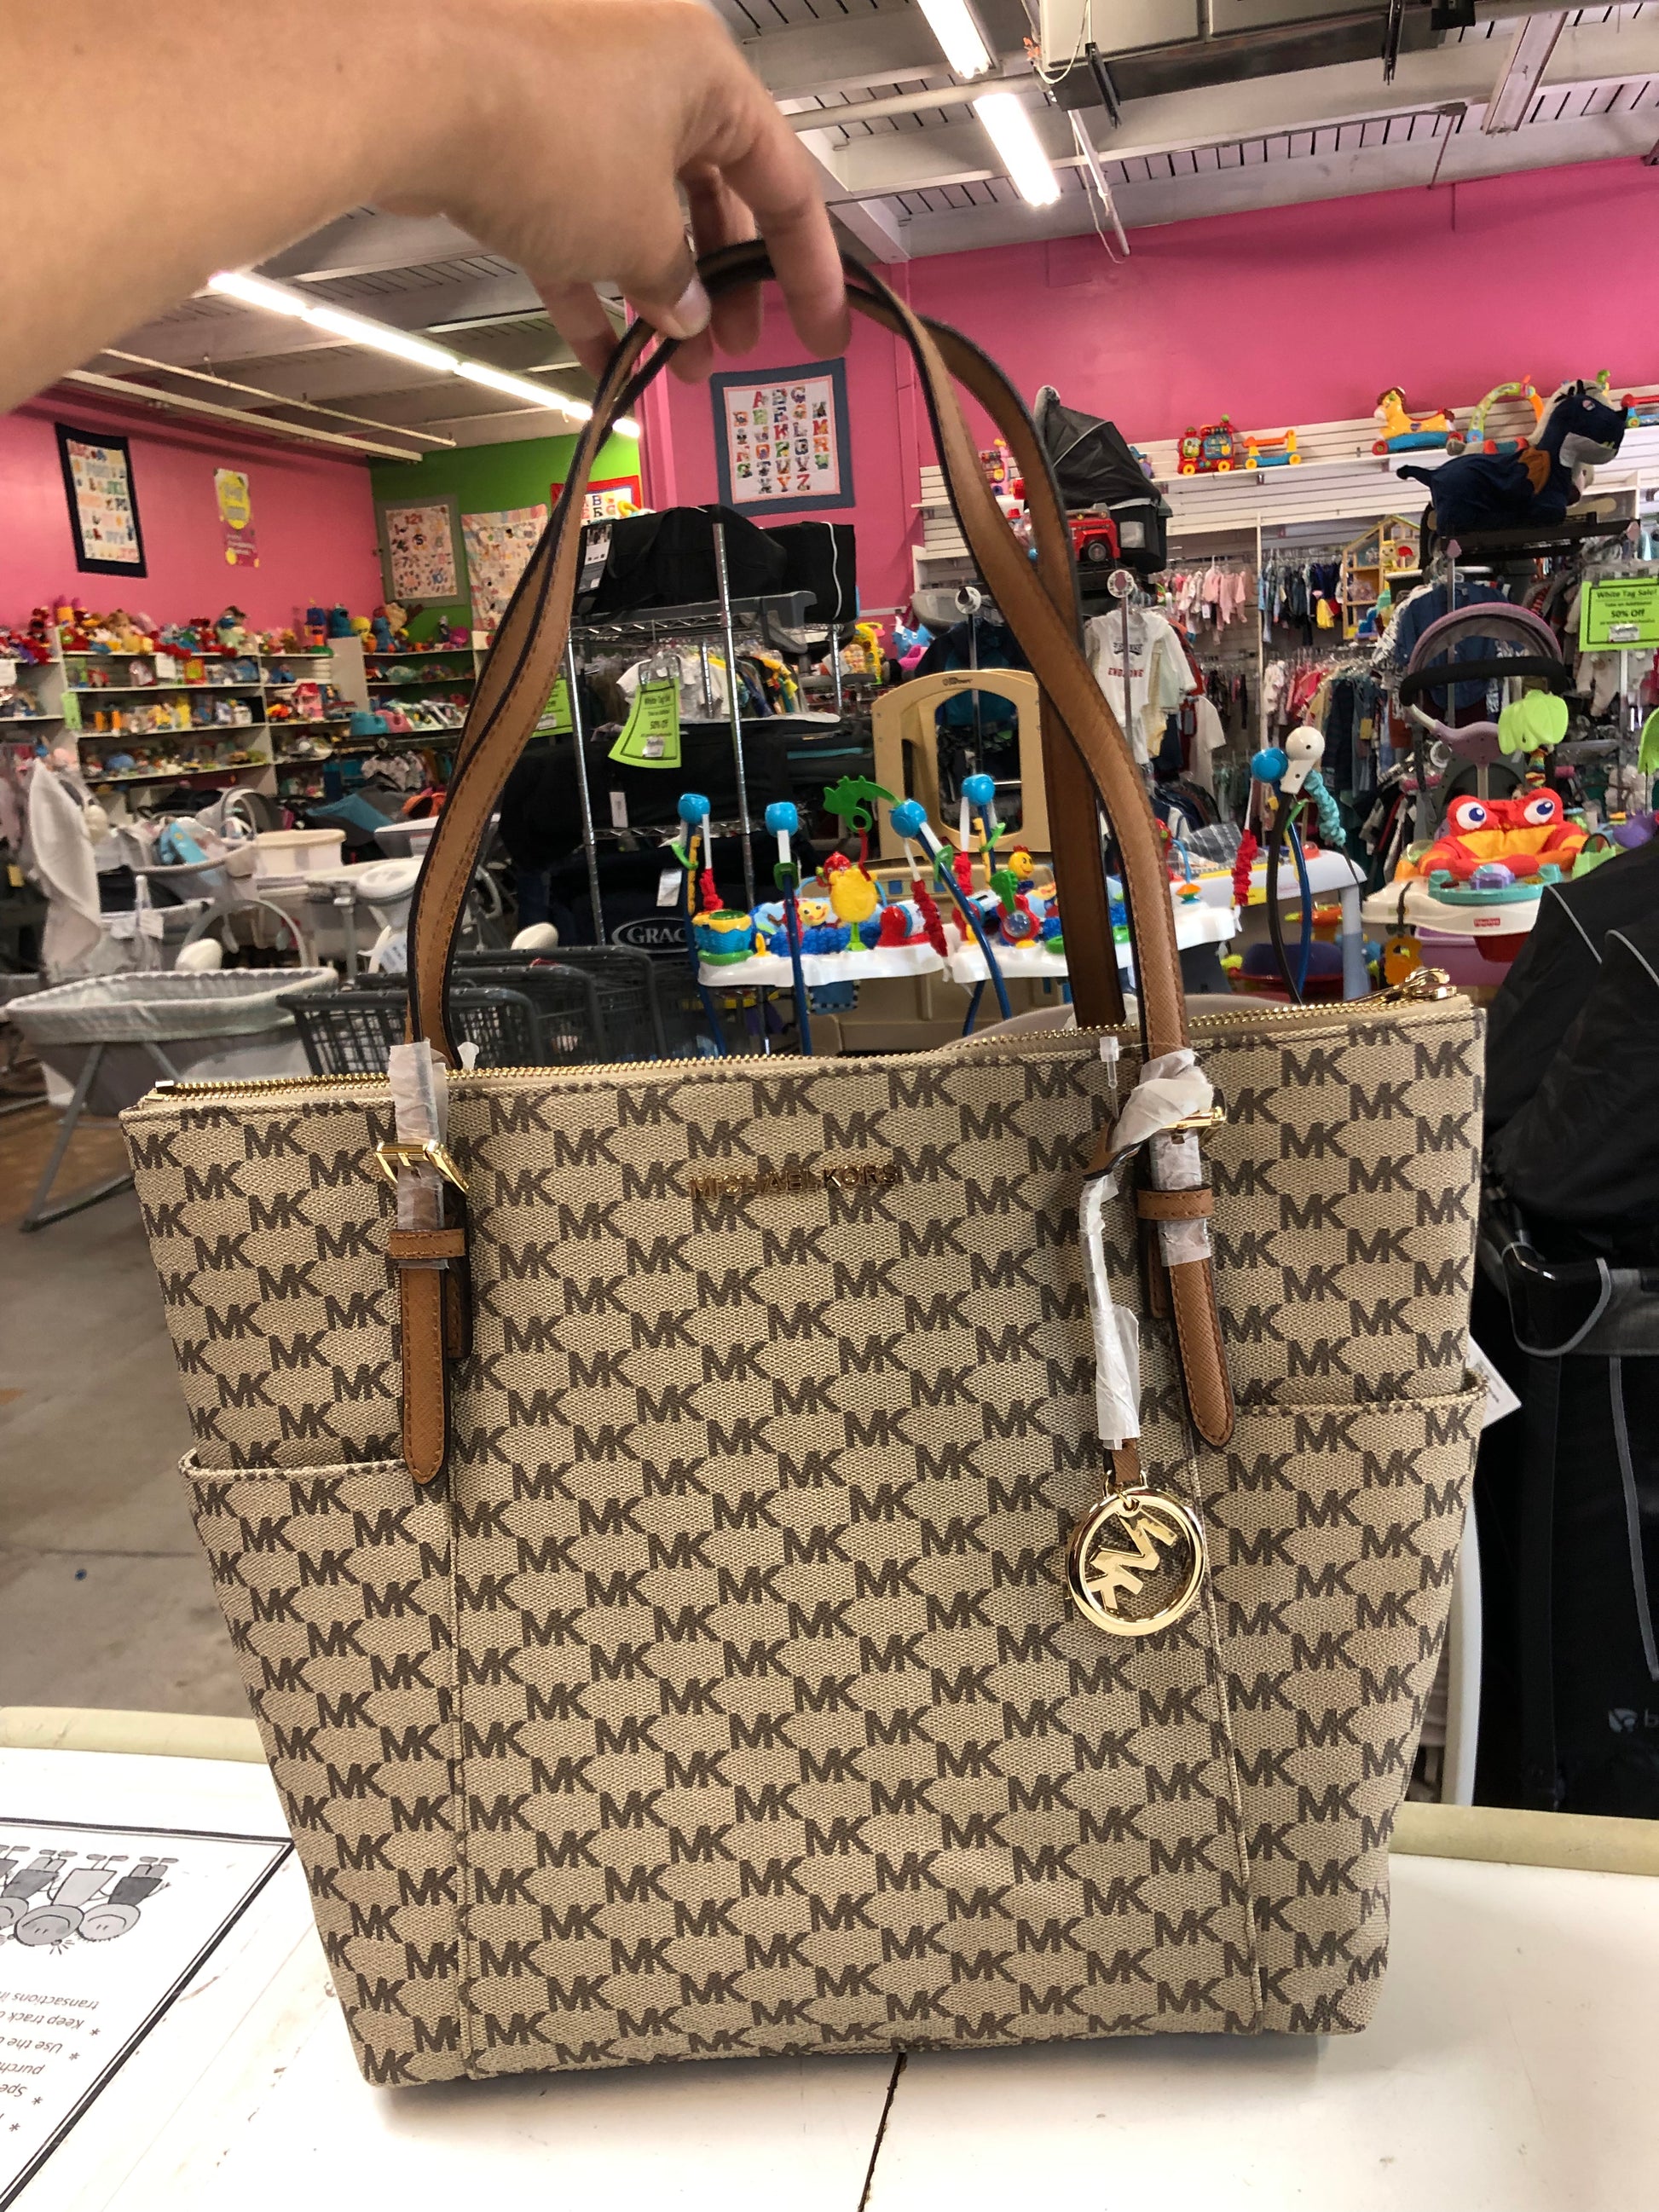 MICHAEL KORS 35F2G2GT7B Gilly Large Color-Block Logo and Leather Tote Bag  In LUGG MULTI